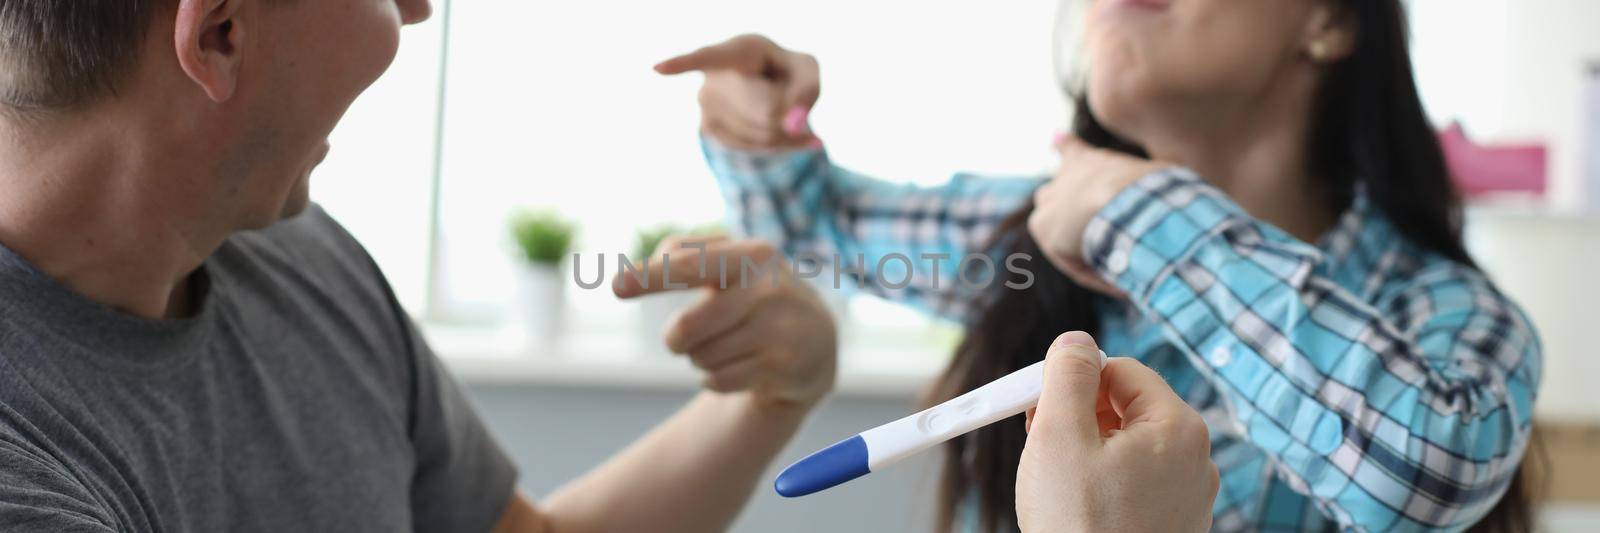 Man and woman communicating with pregnancy test in hands by kuprevich